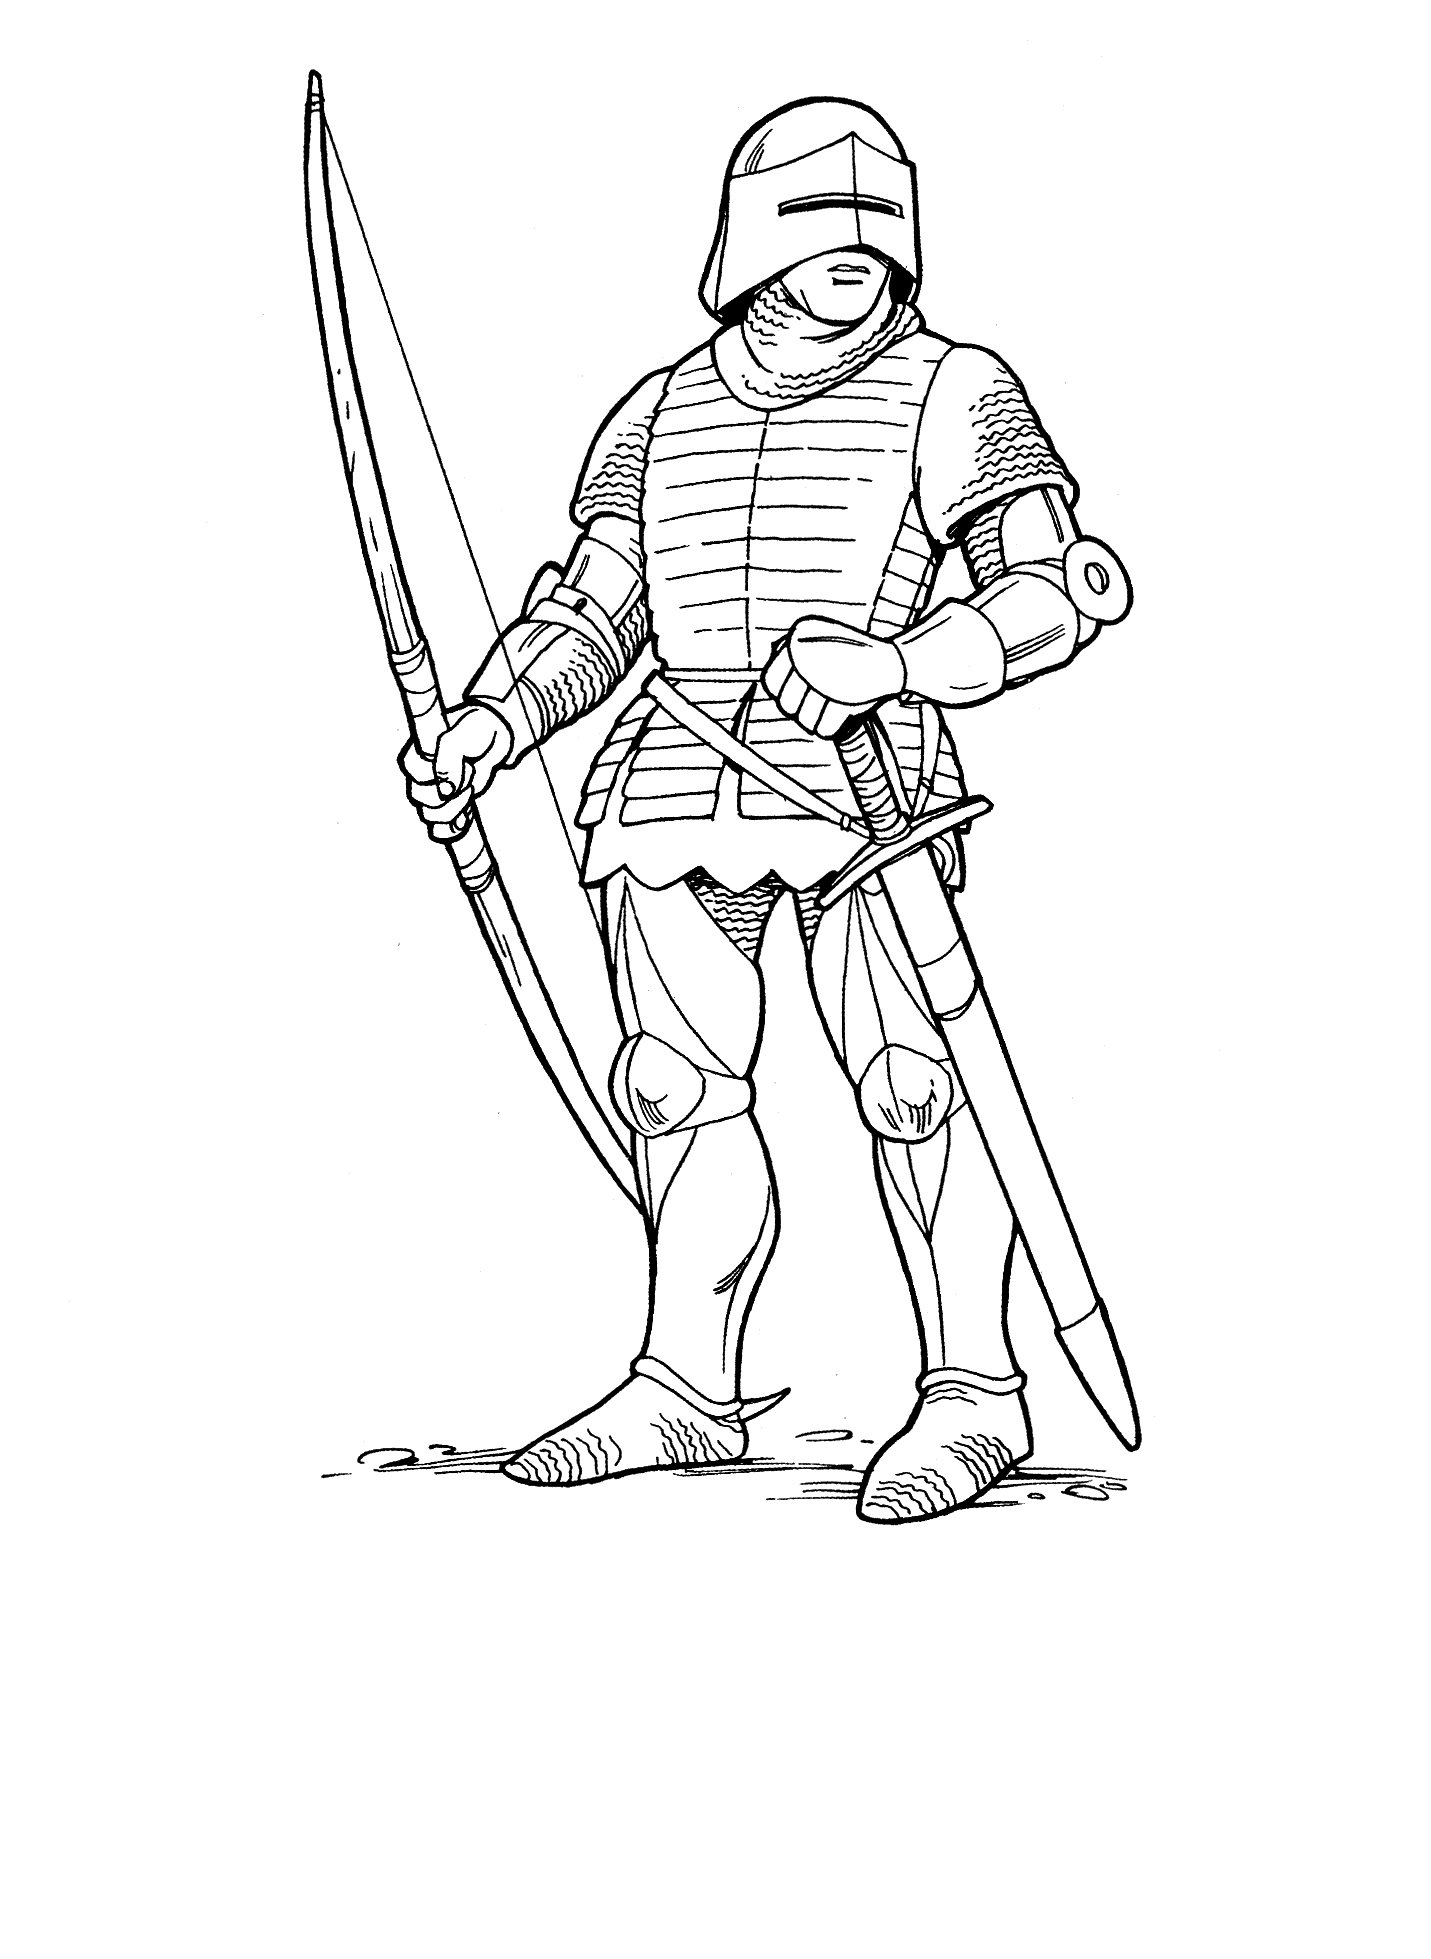 Free Printable Knight Coloring Pages For Kids - Coloring pages